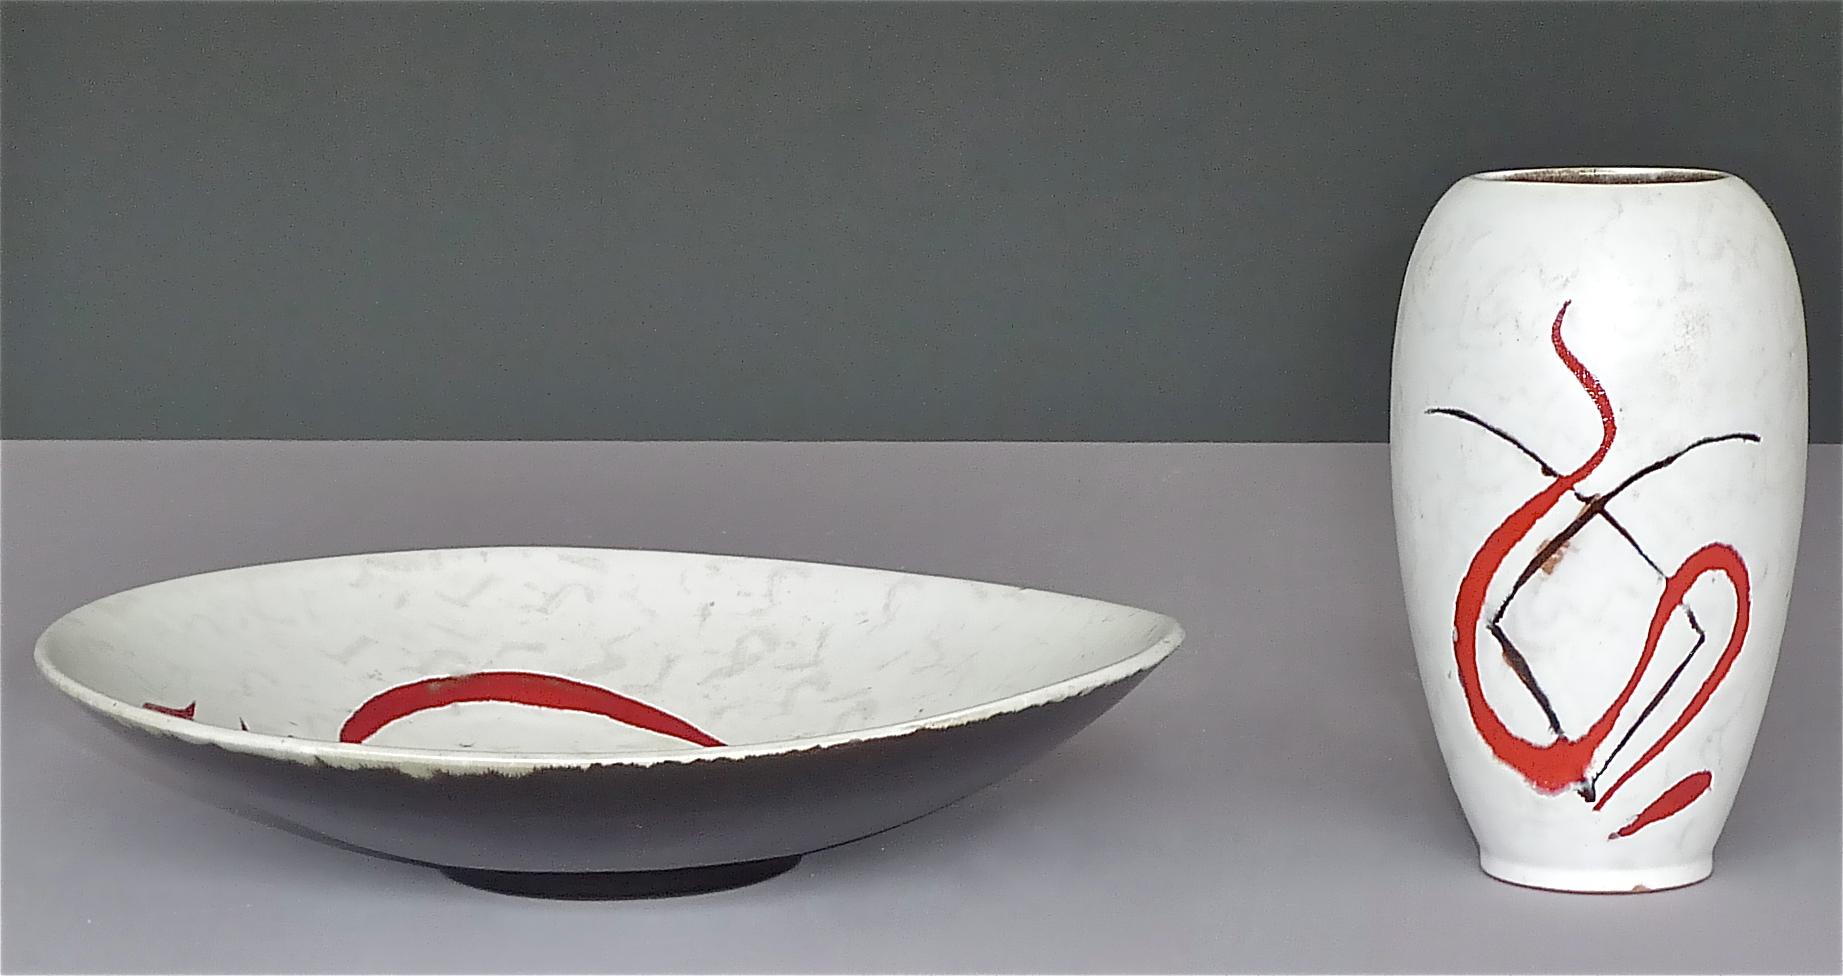 Abstract Midcentury Art Ceramic Vase and Bowl Gambone Miro Style White Red 1950s For Sale 3